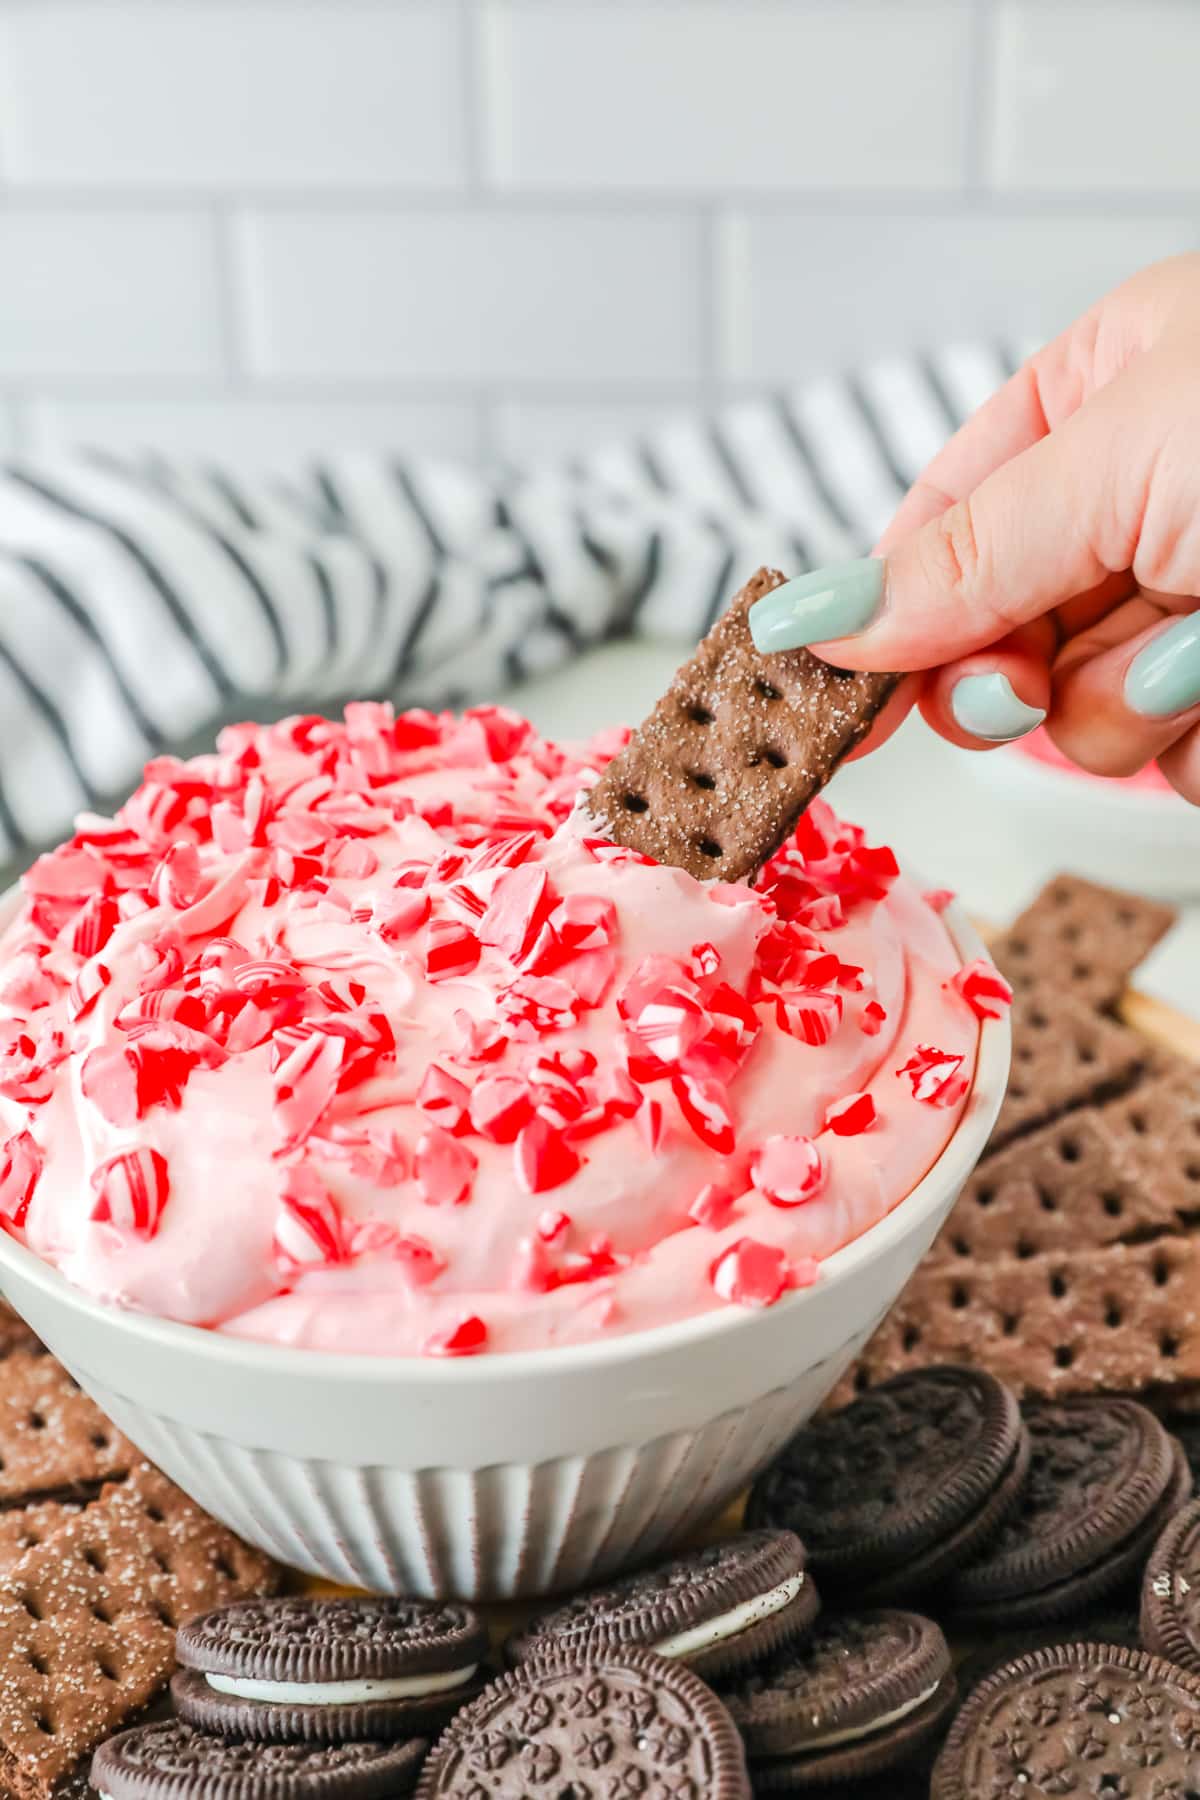 A hand is dipping a cracker into a bowl Peppermint Fluff